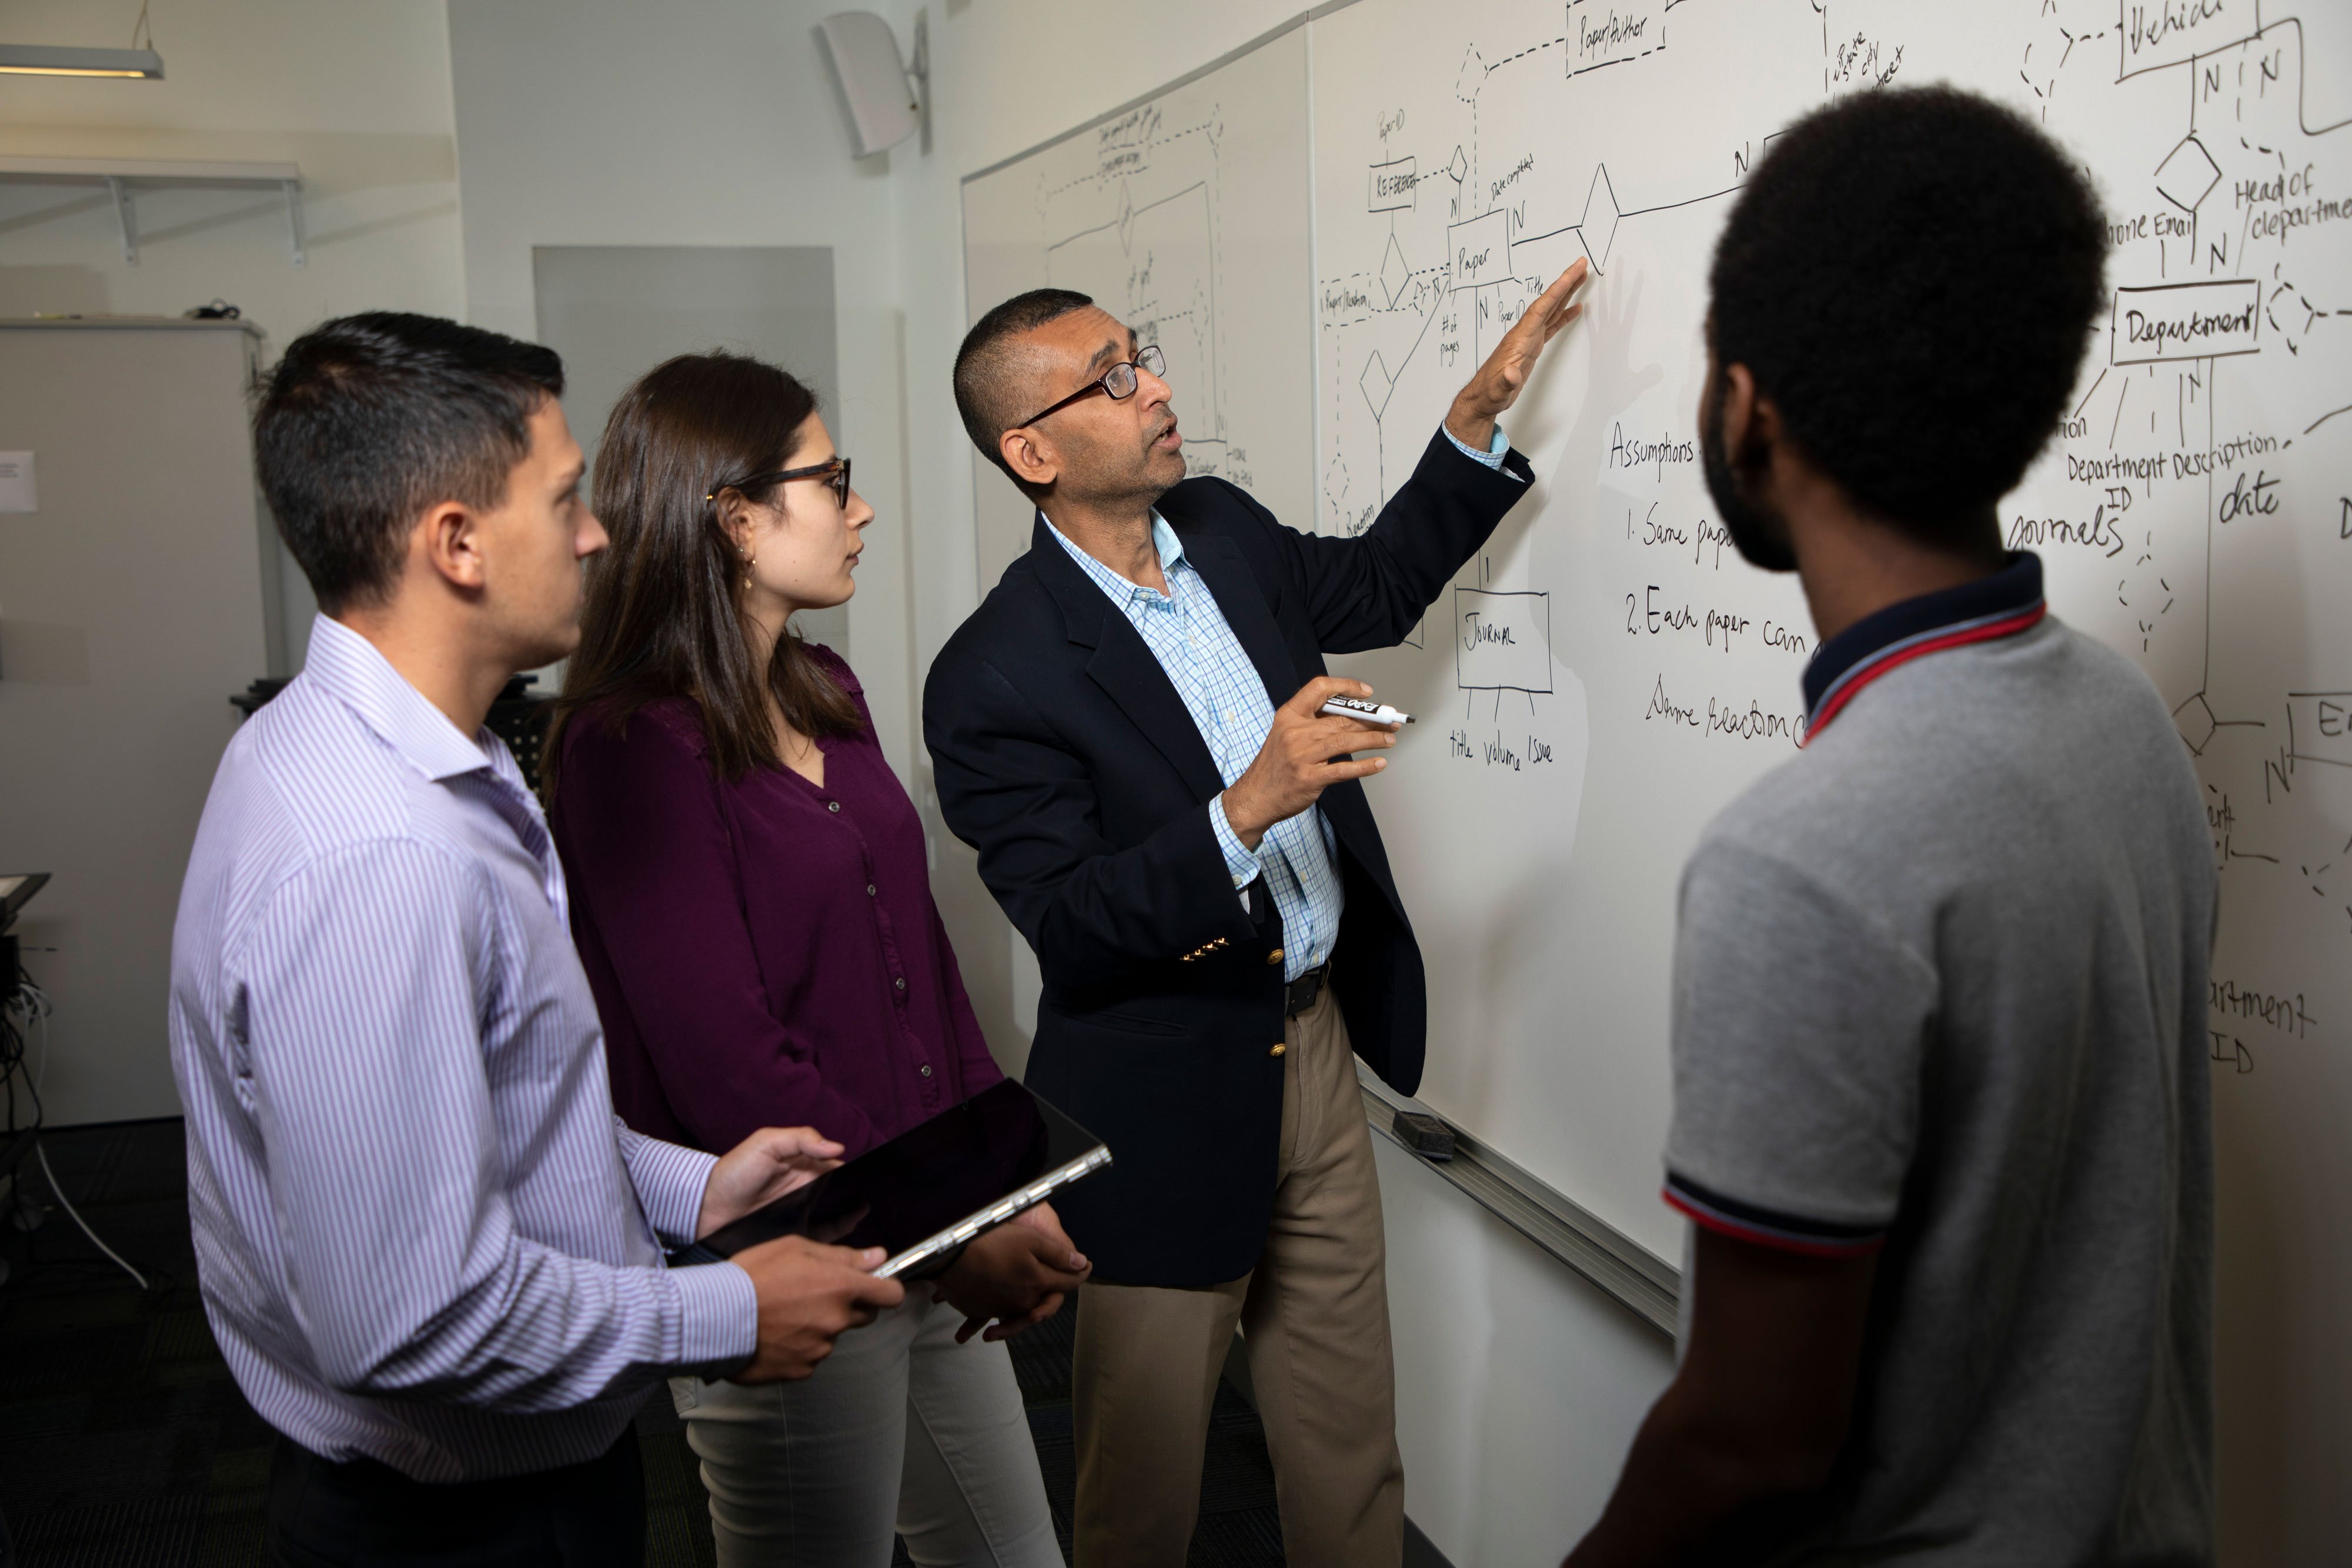 Professor Sanjay Goel works with students inside the Digital Forensics Computer Lab in the Massry Center for Business.